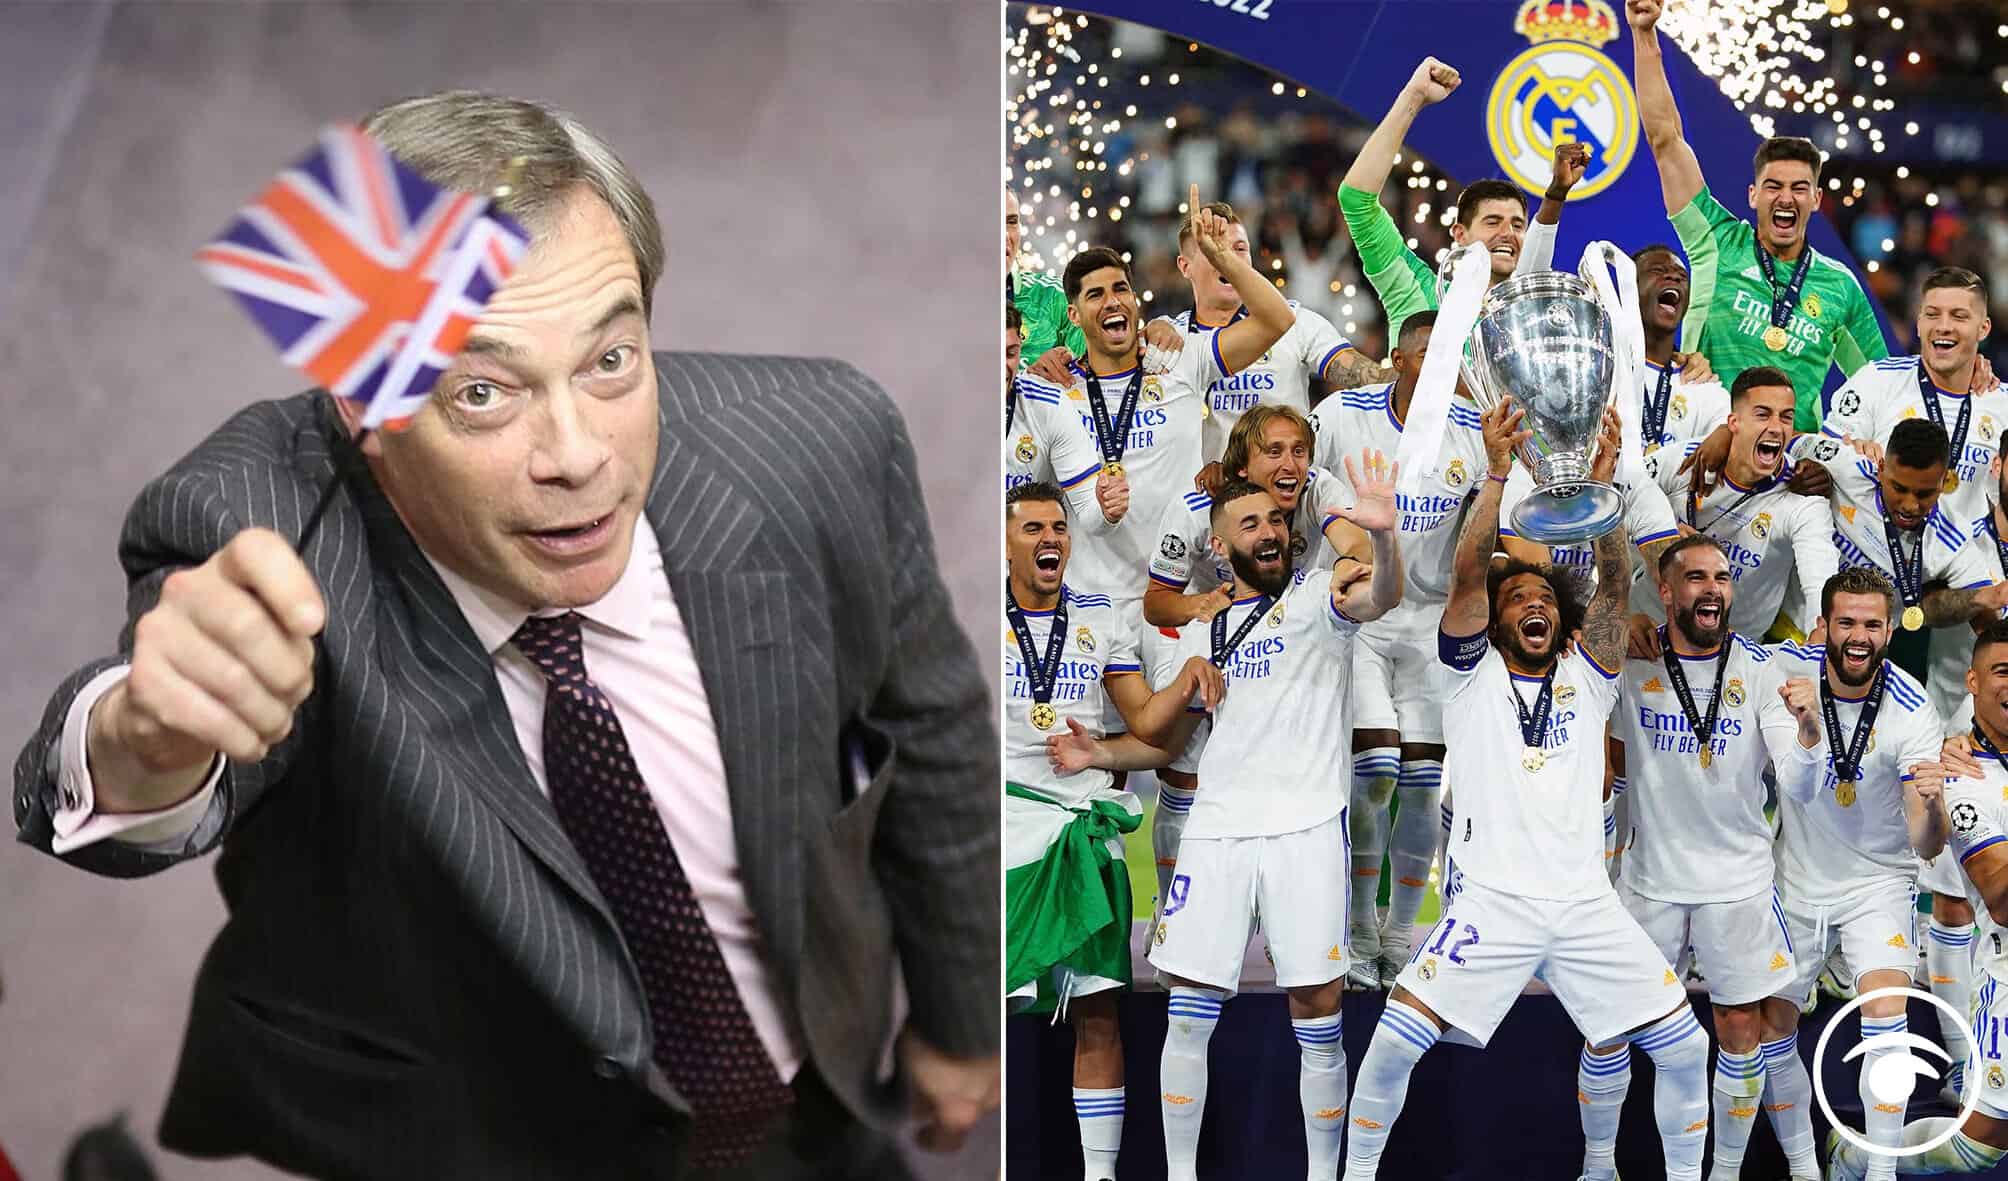 Now Nigel Farage wants a ‘Brexit for football’ but his previous comments are a massive own goal